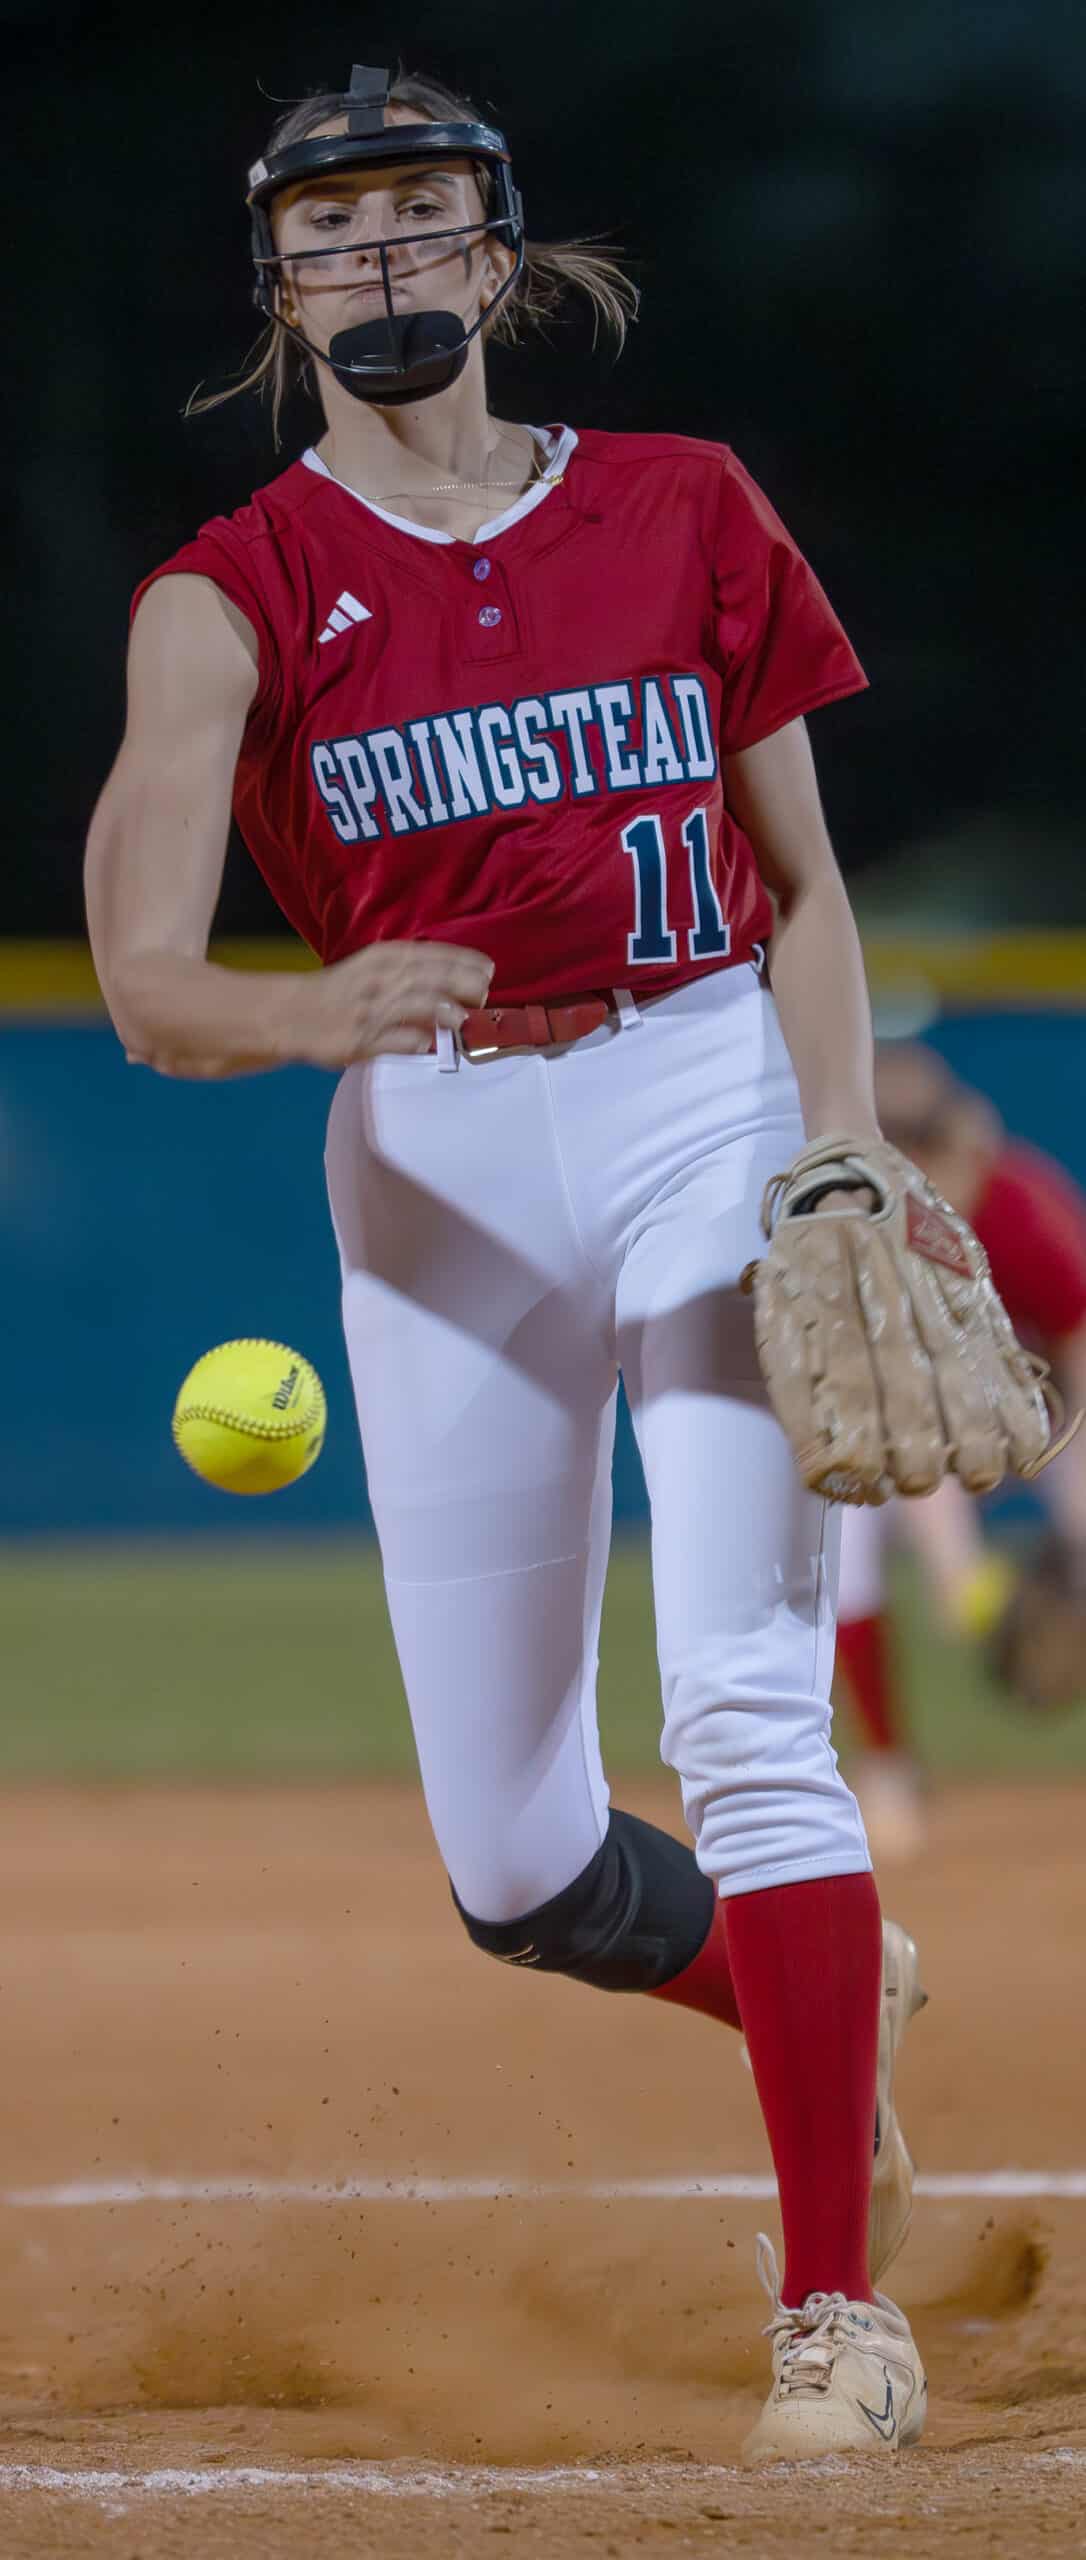 Springstead pitcher, Ava Miller concentrates on a pitch delivery Tuesday night in the game with visiting Weeki Wachee High. [Photo by Joe DiCristofalo]